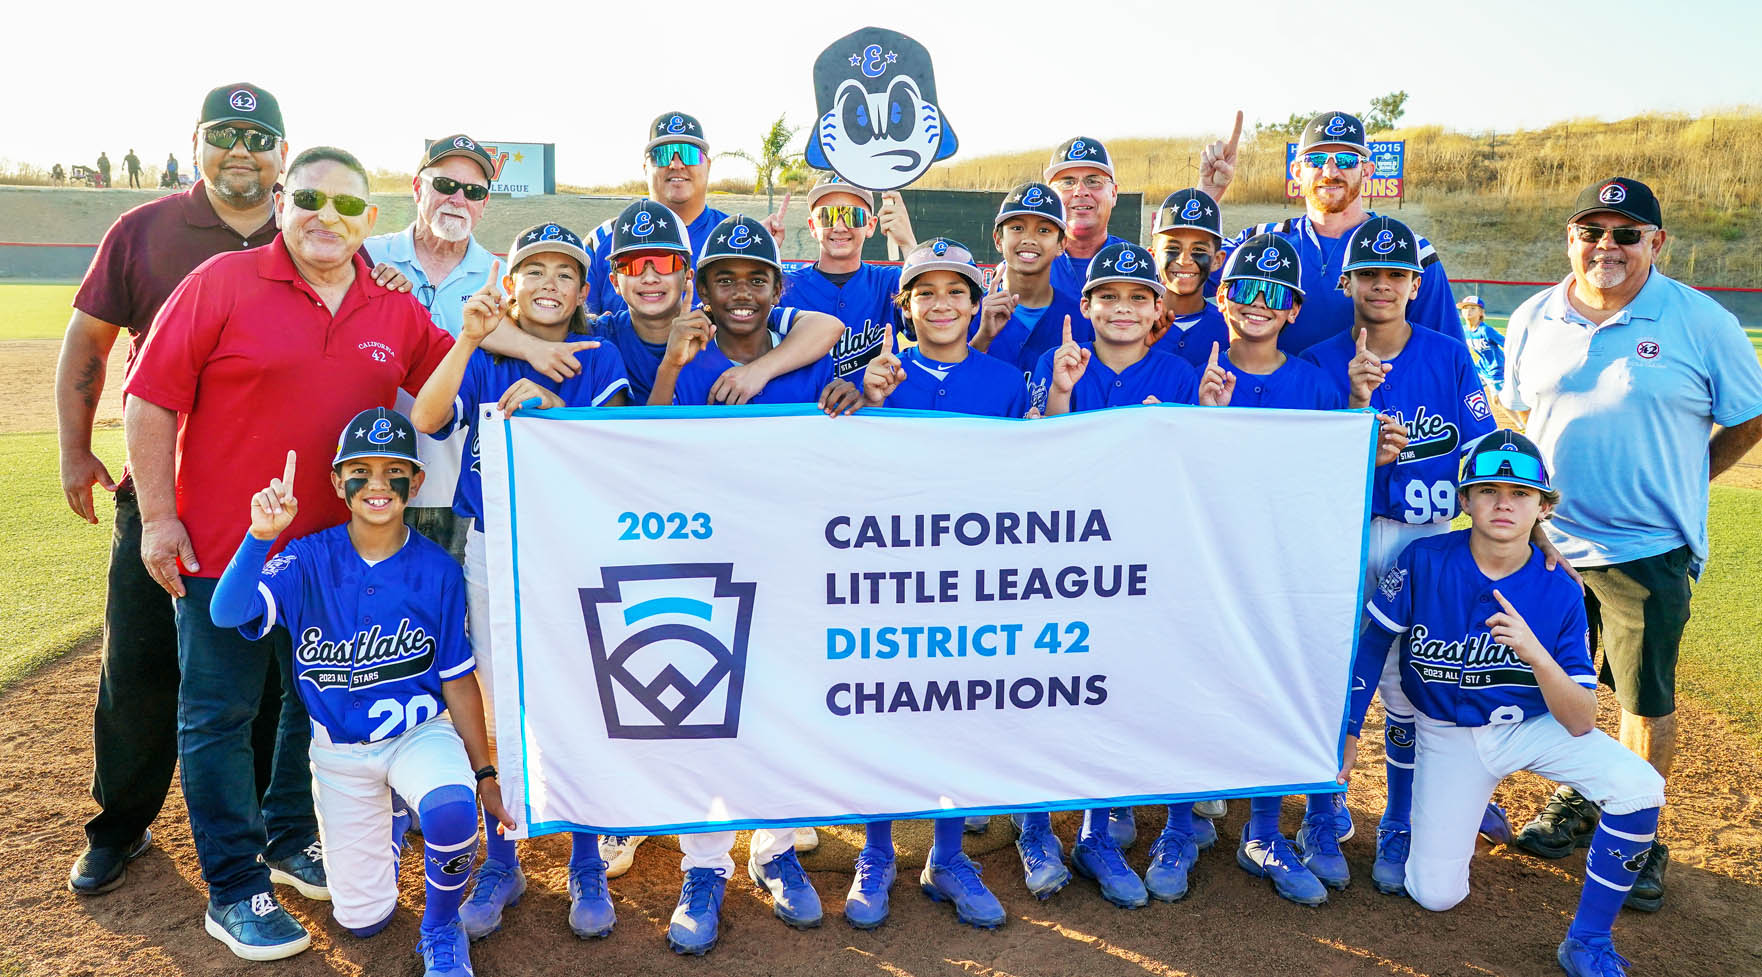 Road to the Little League World Series starts for District 42